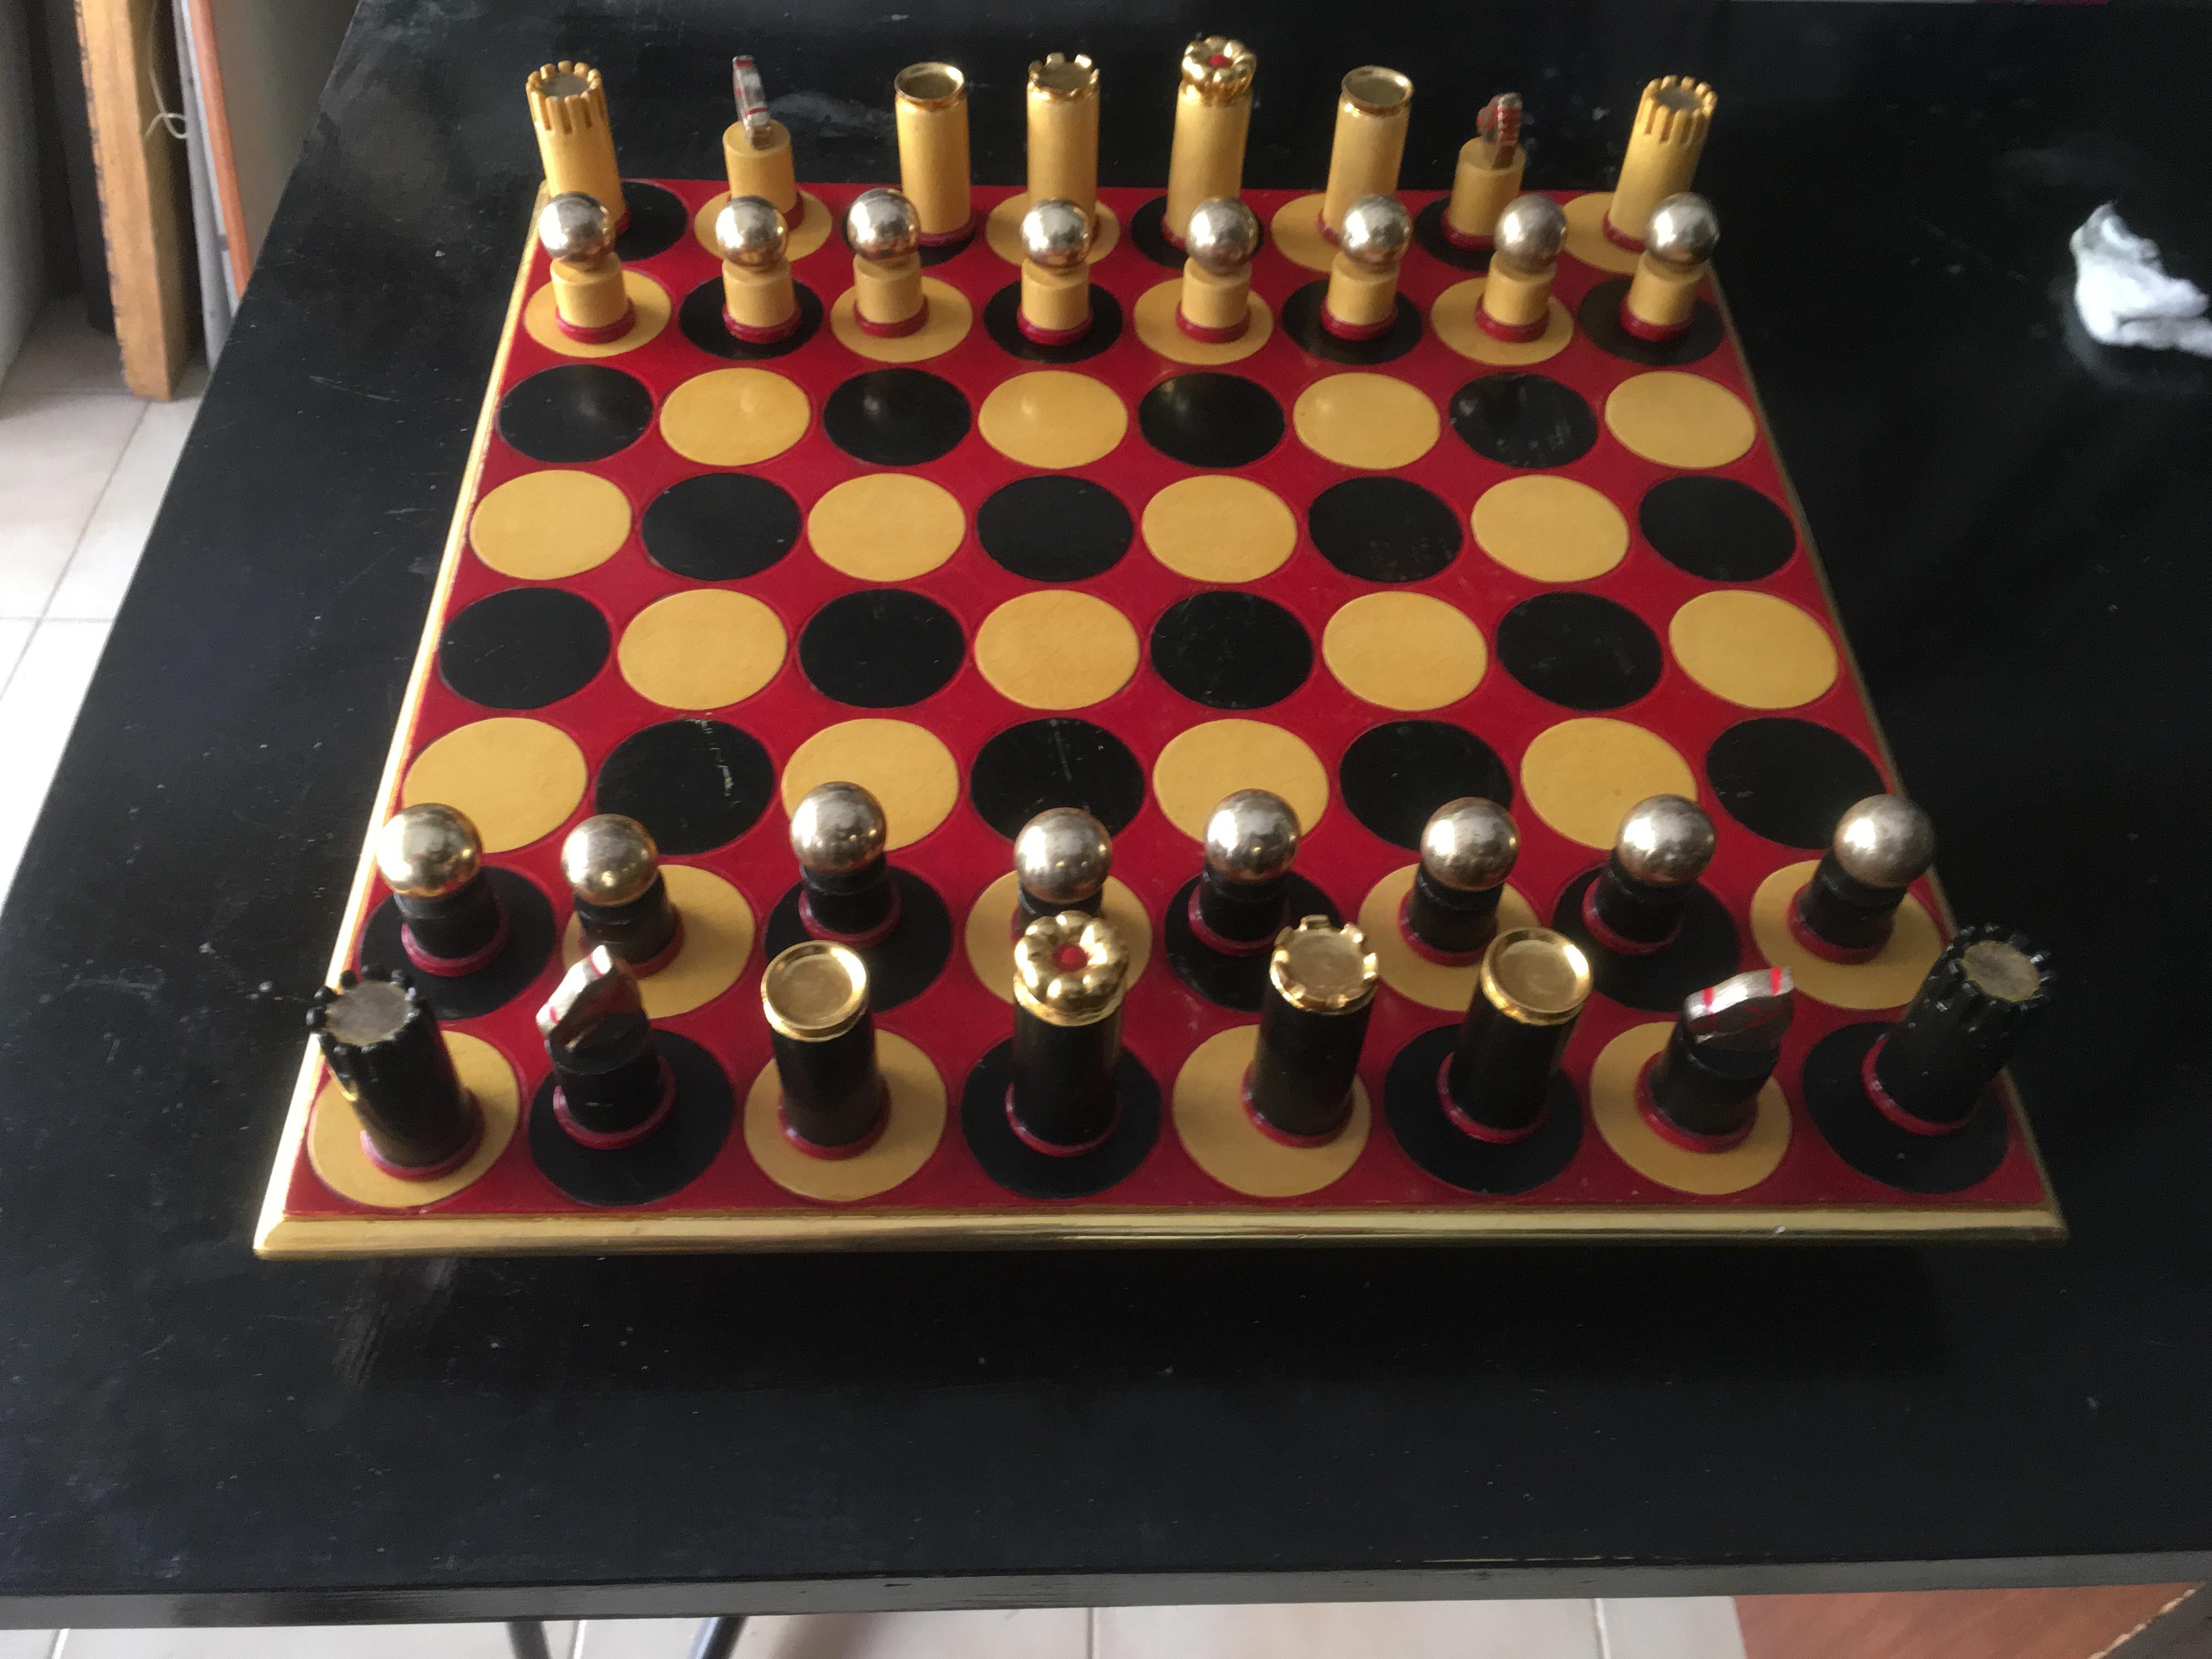 Vintage chess board in painted and gilded wood. The chessboard is very original, the chess is round and not square, painted in black and gold on a red background. The game pieces are modern and painted in black and gold.